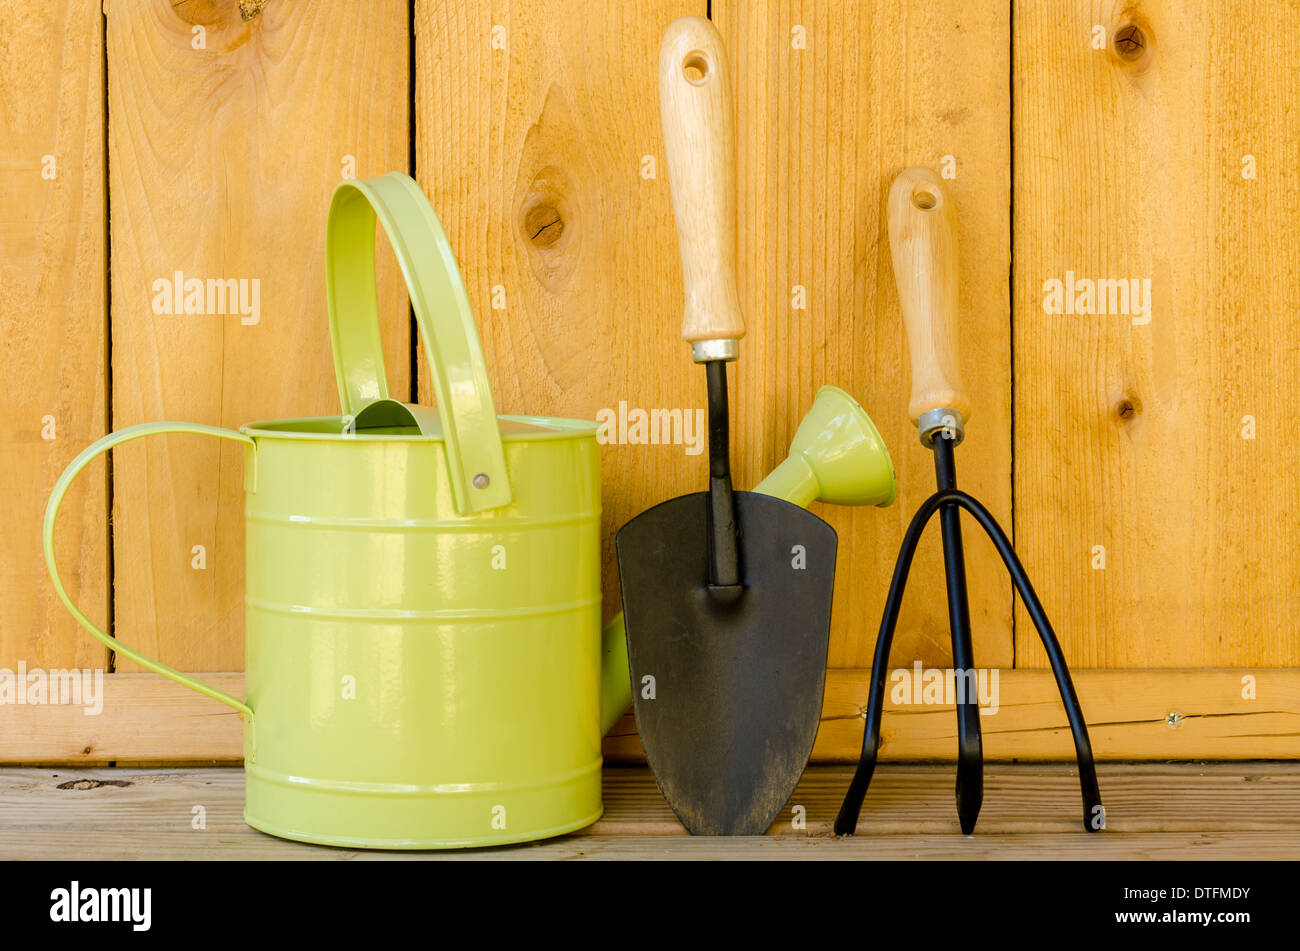 Gardening tools with watering can, trowel, and hand cultivator on wood background. Stock Photo